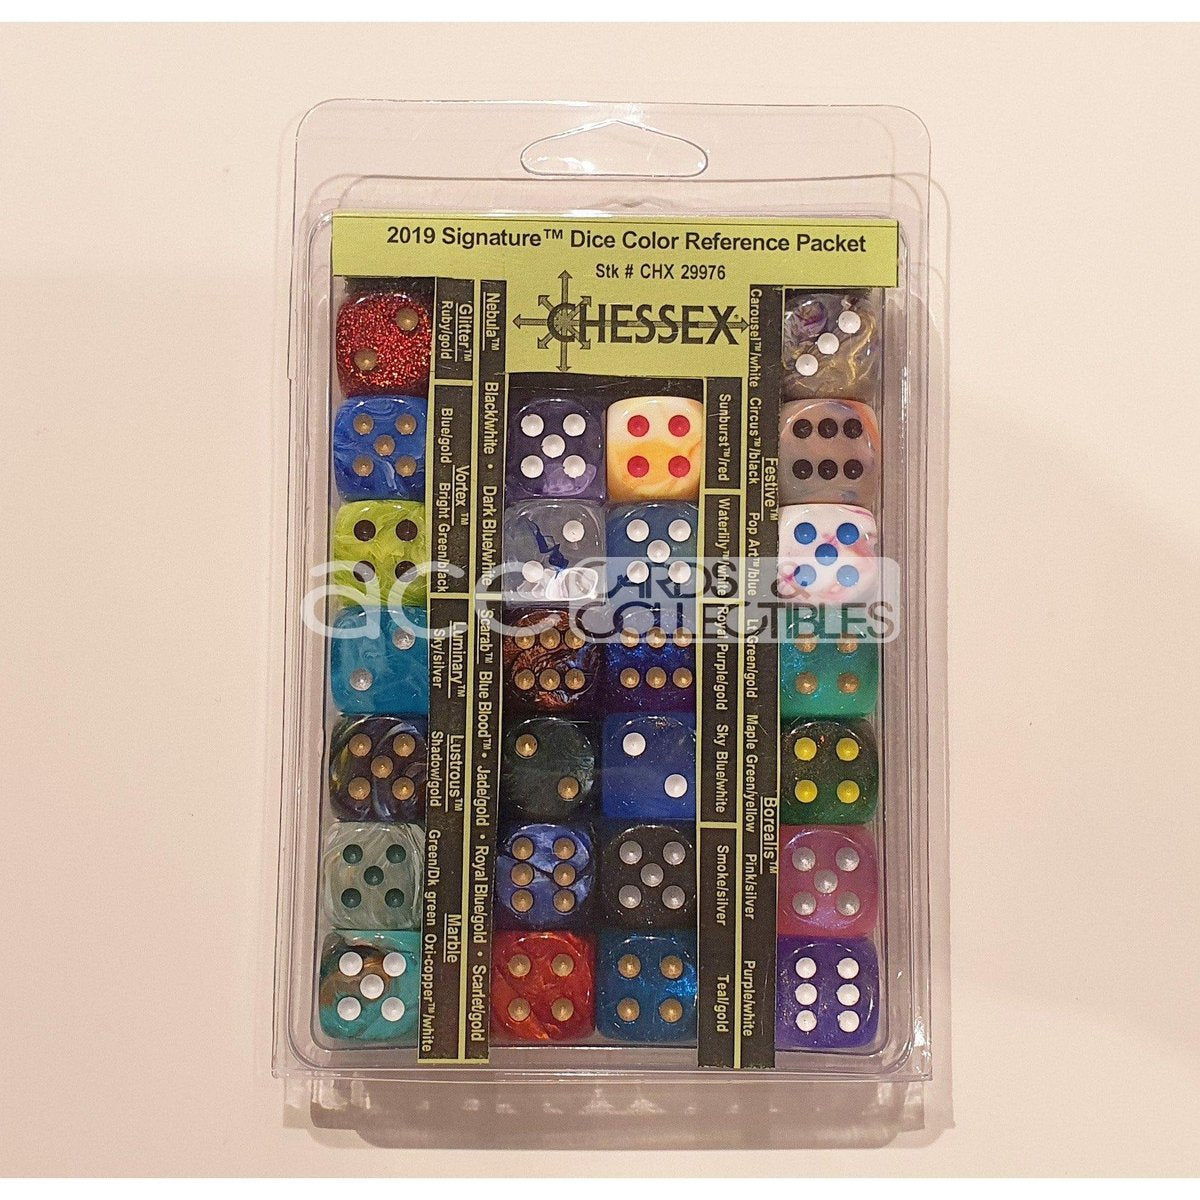 Chessex 2019 Signature™ Color Reference Packet 26pcs Dice [CHX29976]-Chessex-Ace Cards & Collectibles